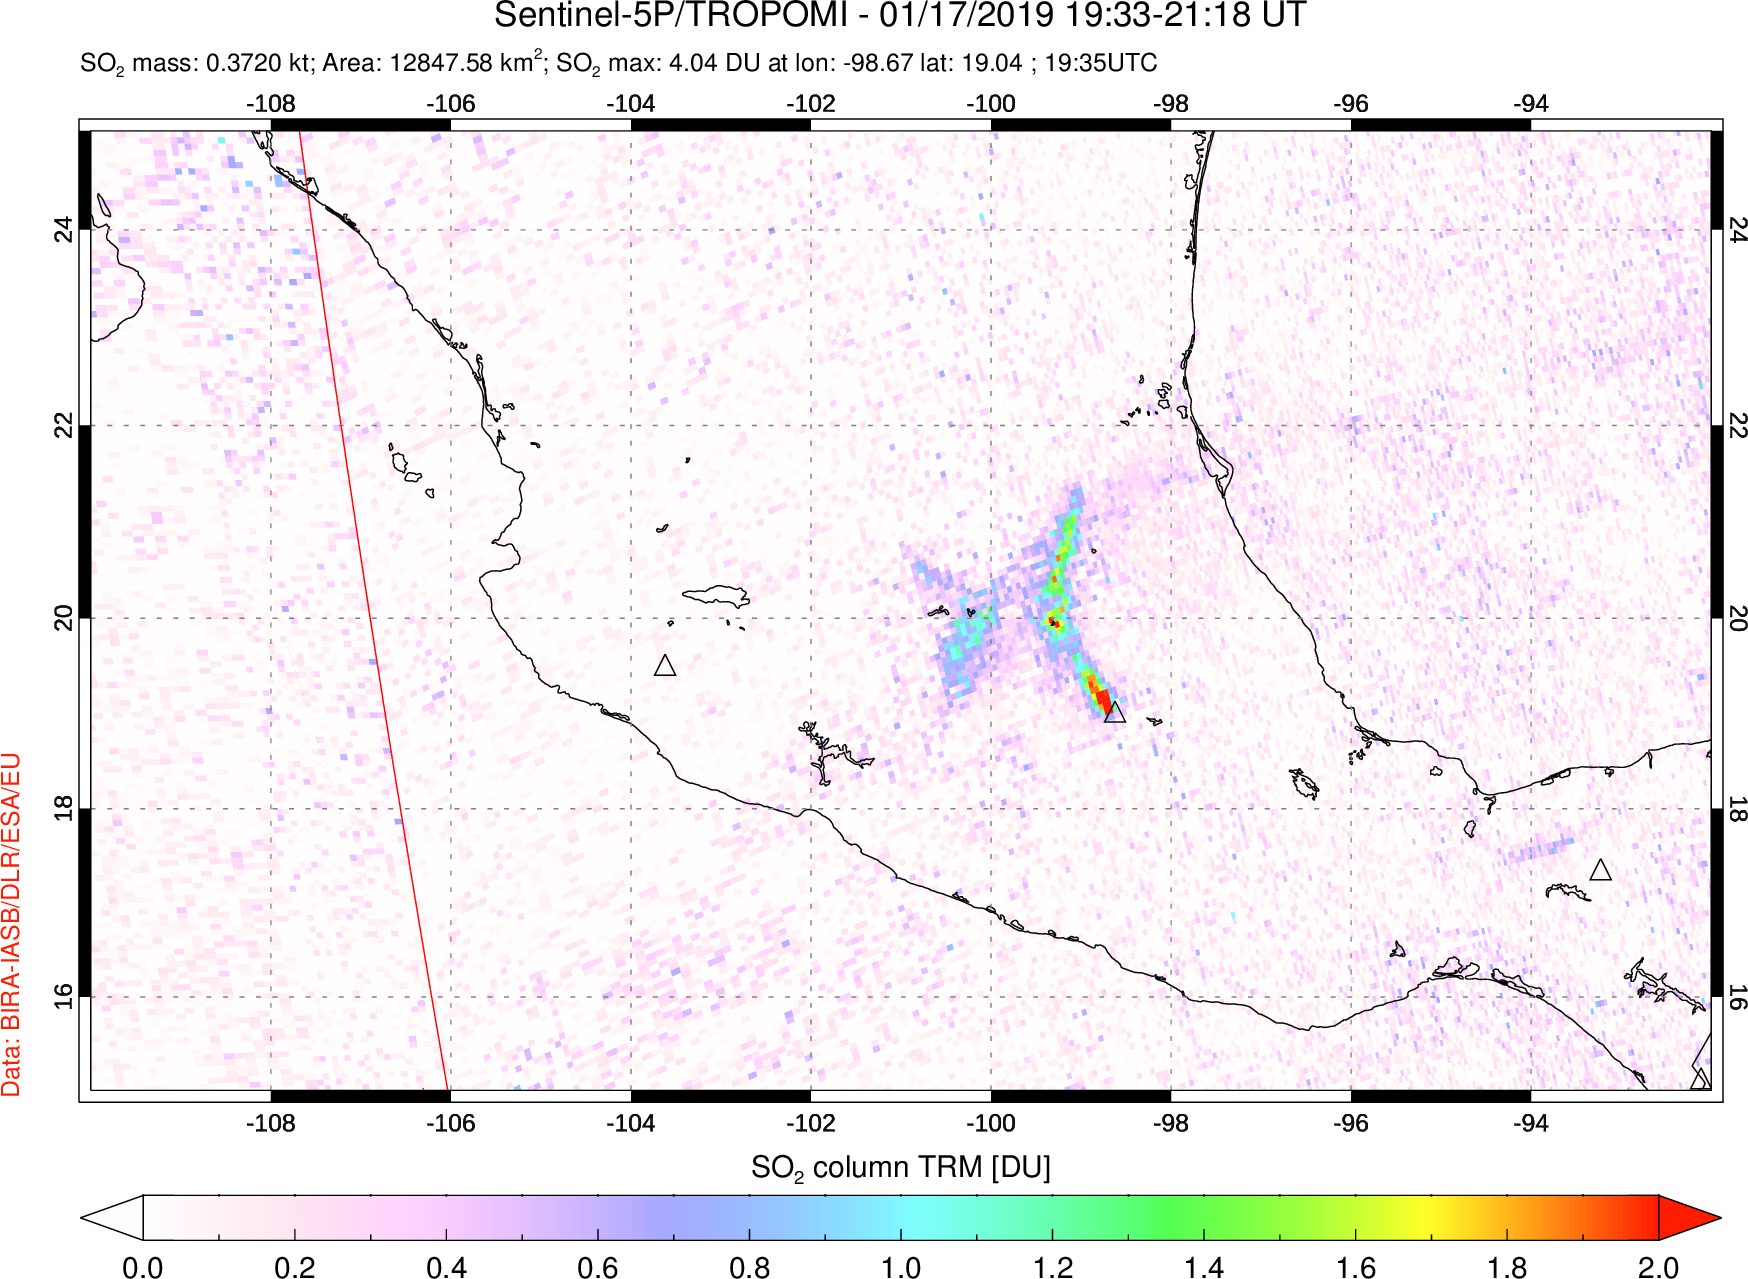 A sulfur dioxide image over Mexico on Jan 17, 2019.